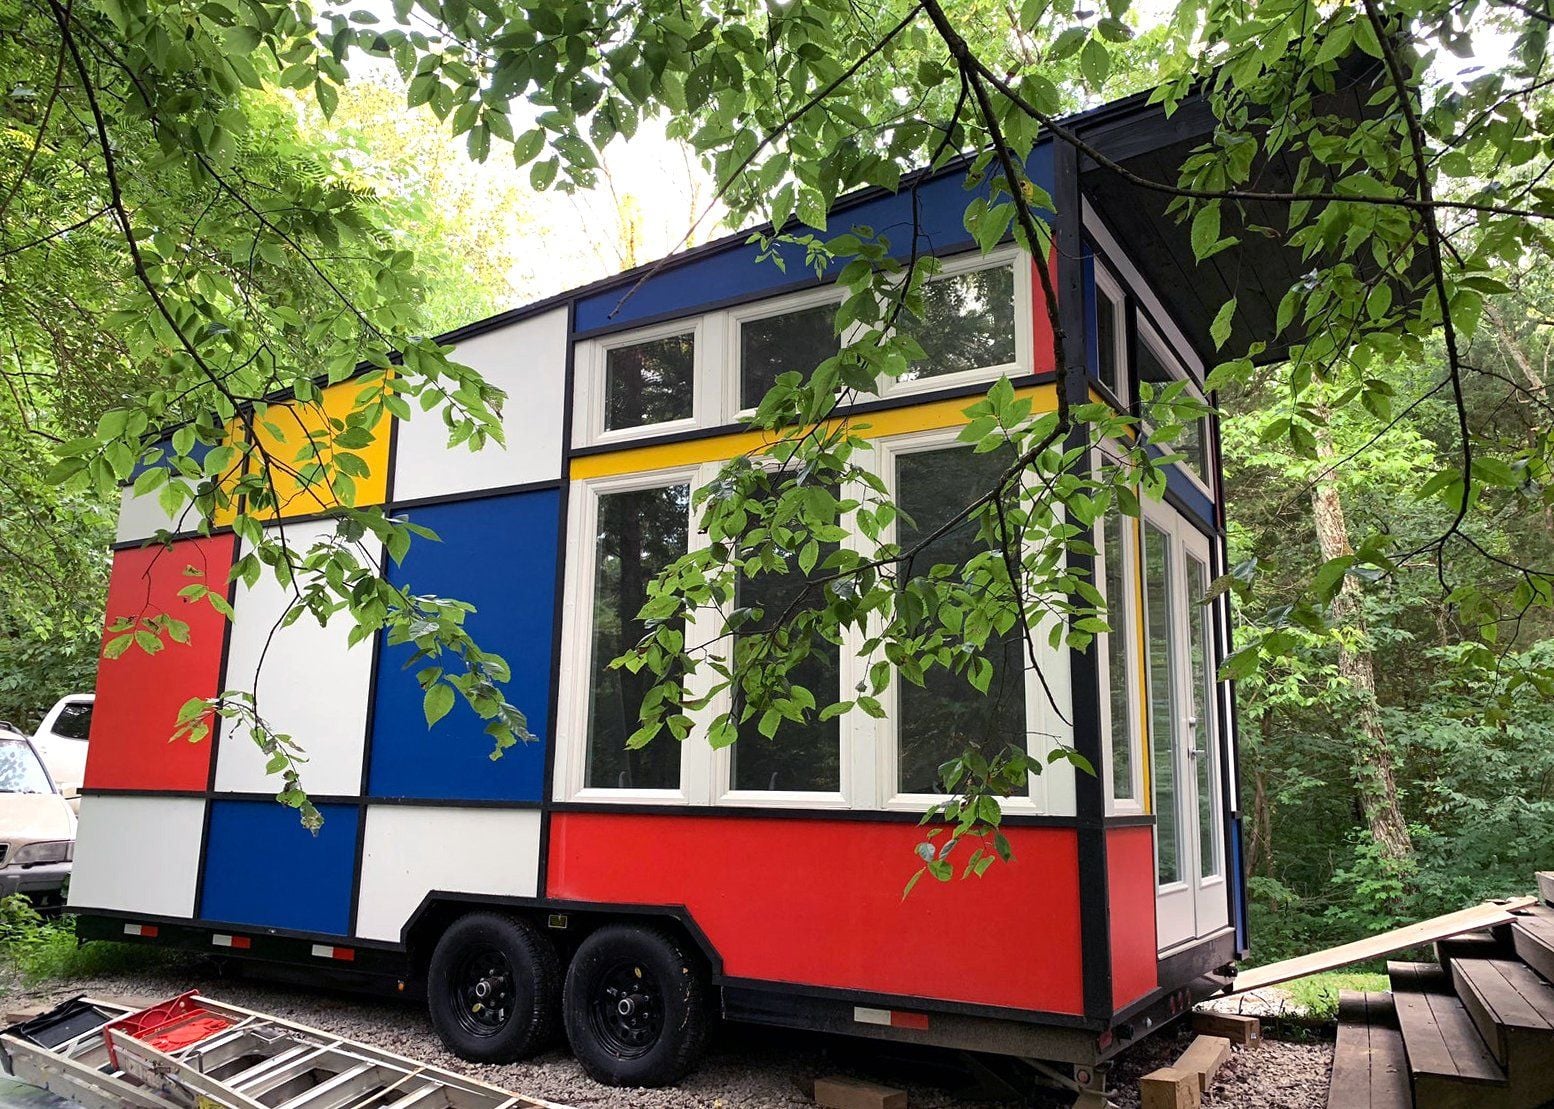 You Can Buy This Piet Mondrian-Inspired Tiny House on Etsy for $40K